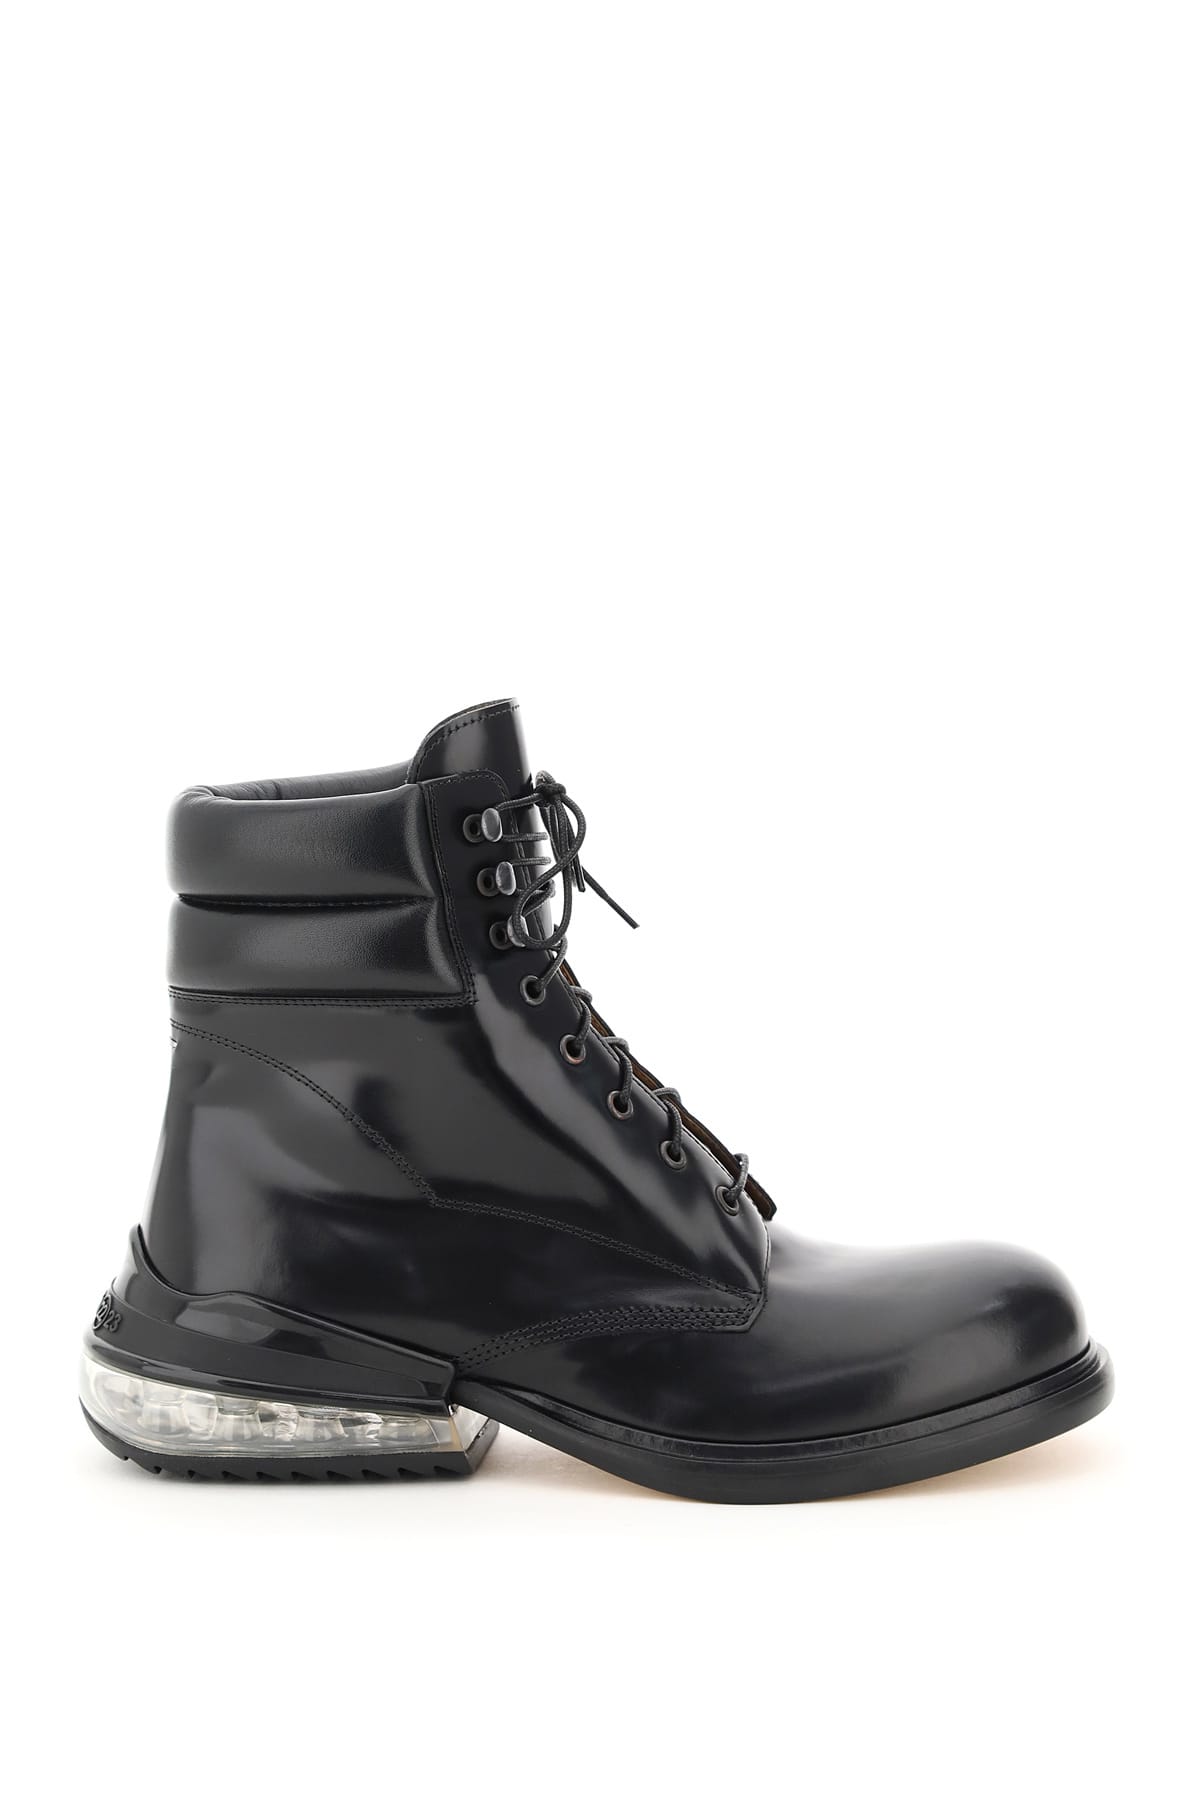 Maison Margiela Lace-up Boots With Airbag Heel